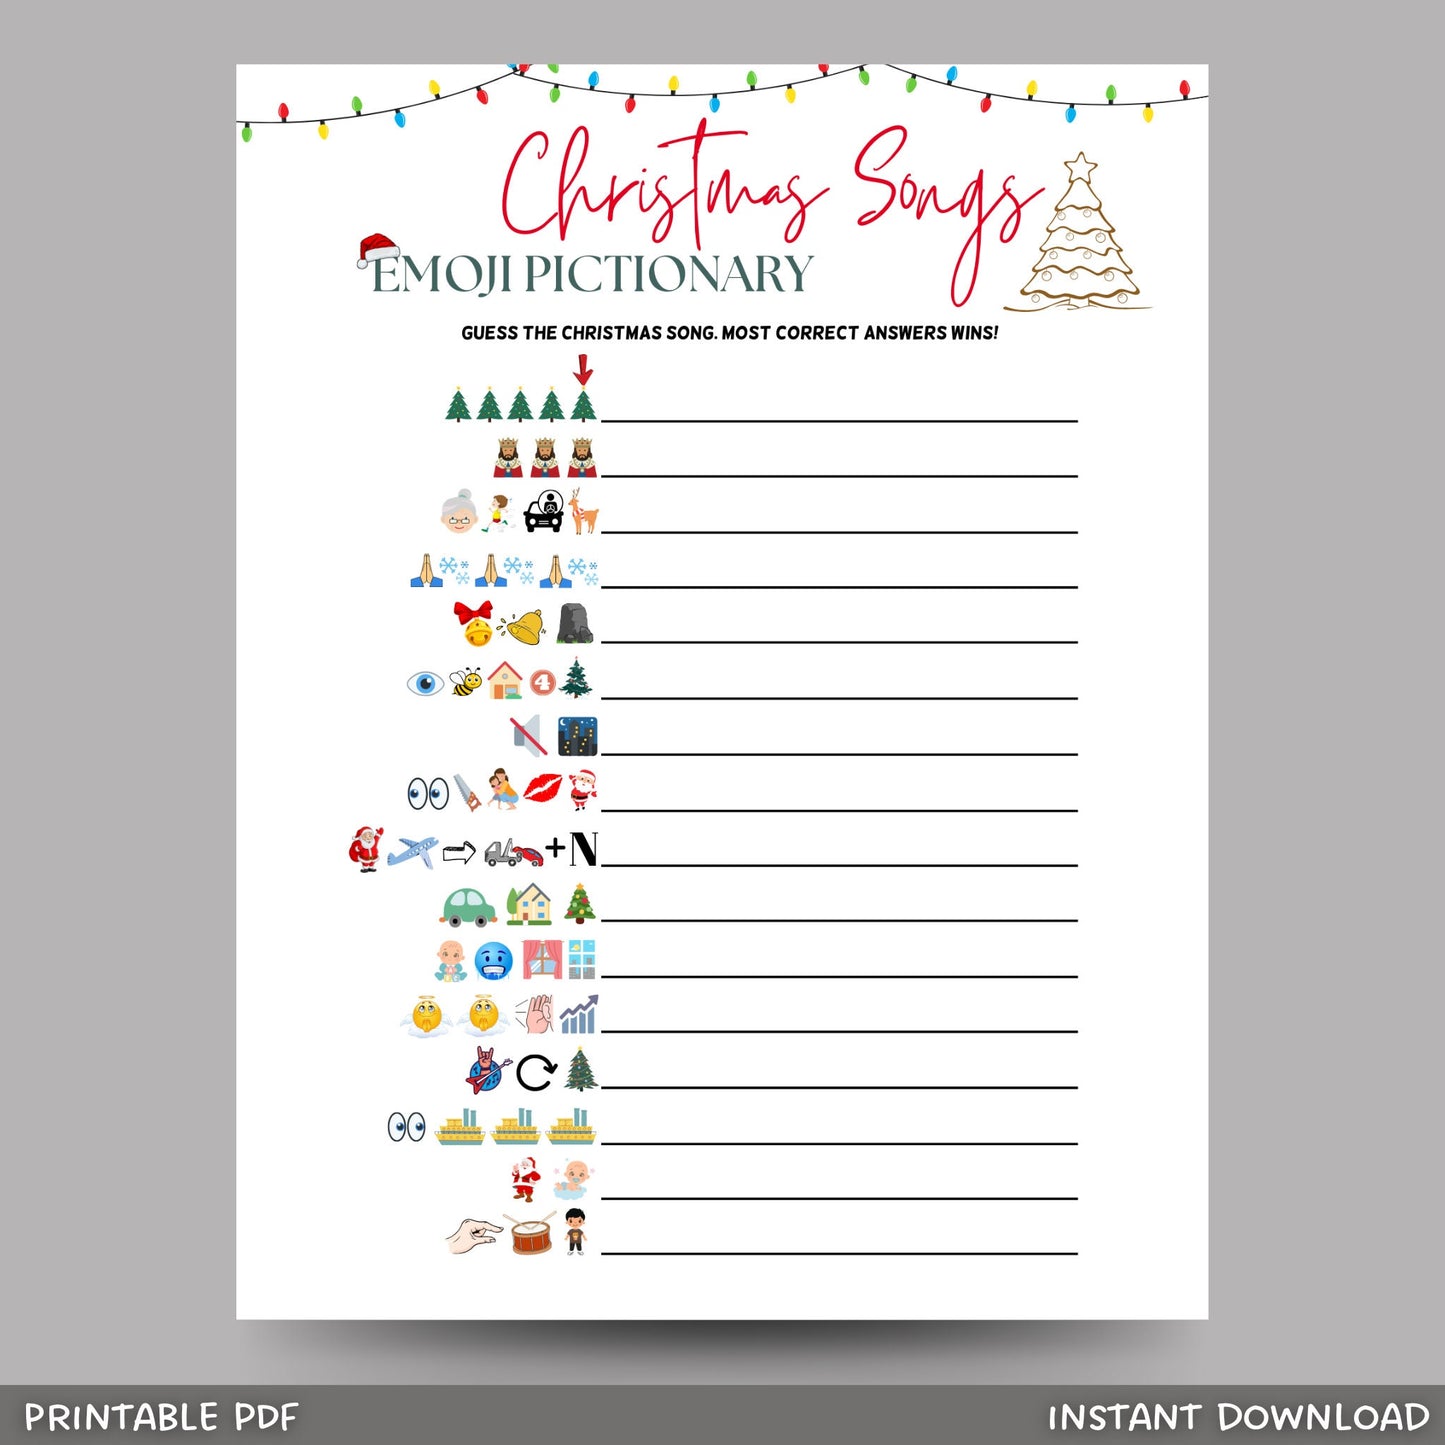 Christmas Songs Emoji Pictionary Printable, Christmas Guessing Game, Xmas Movie Emoji Game, Fun Holiday Family Game, Office Work Party Game